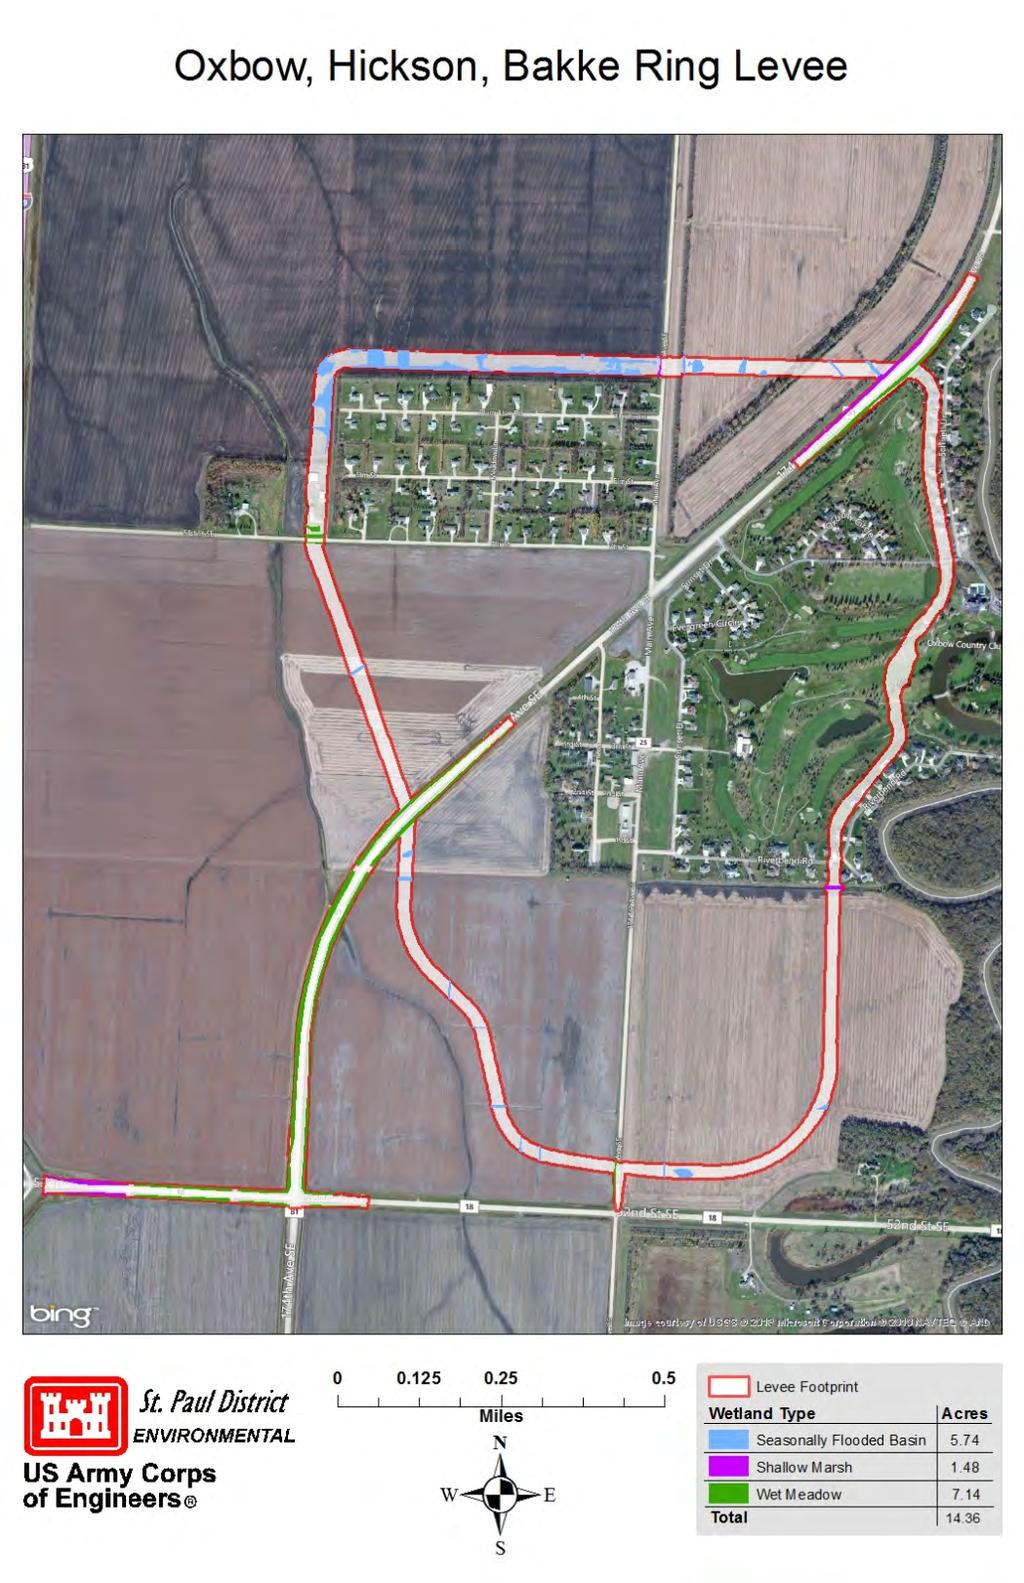 Oxbow/Hickson/Bakke Ring Levee: There would be approximately 14 acres of wetlands impacted by the ring levee around Oxbow, Hickson, and Bakke and the associated road raises (Figure 21).